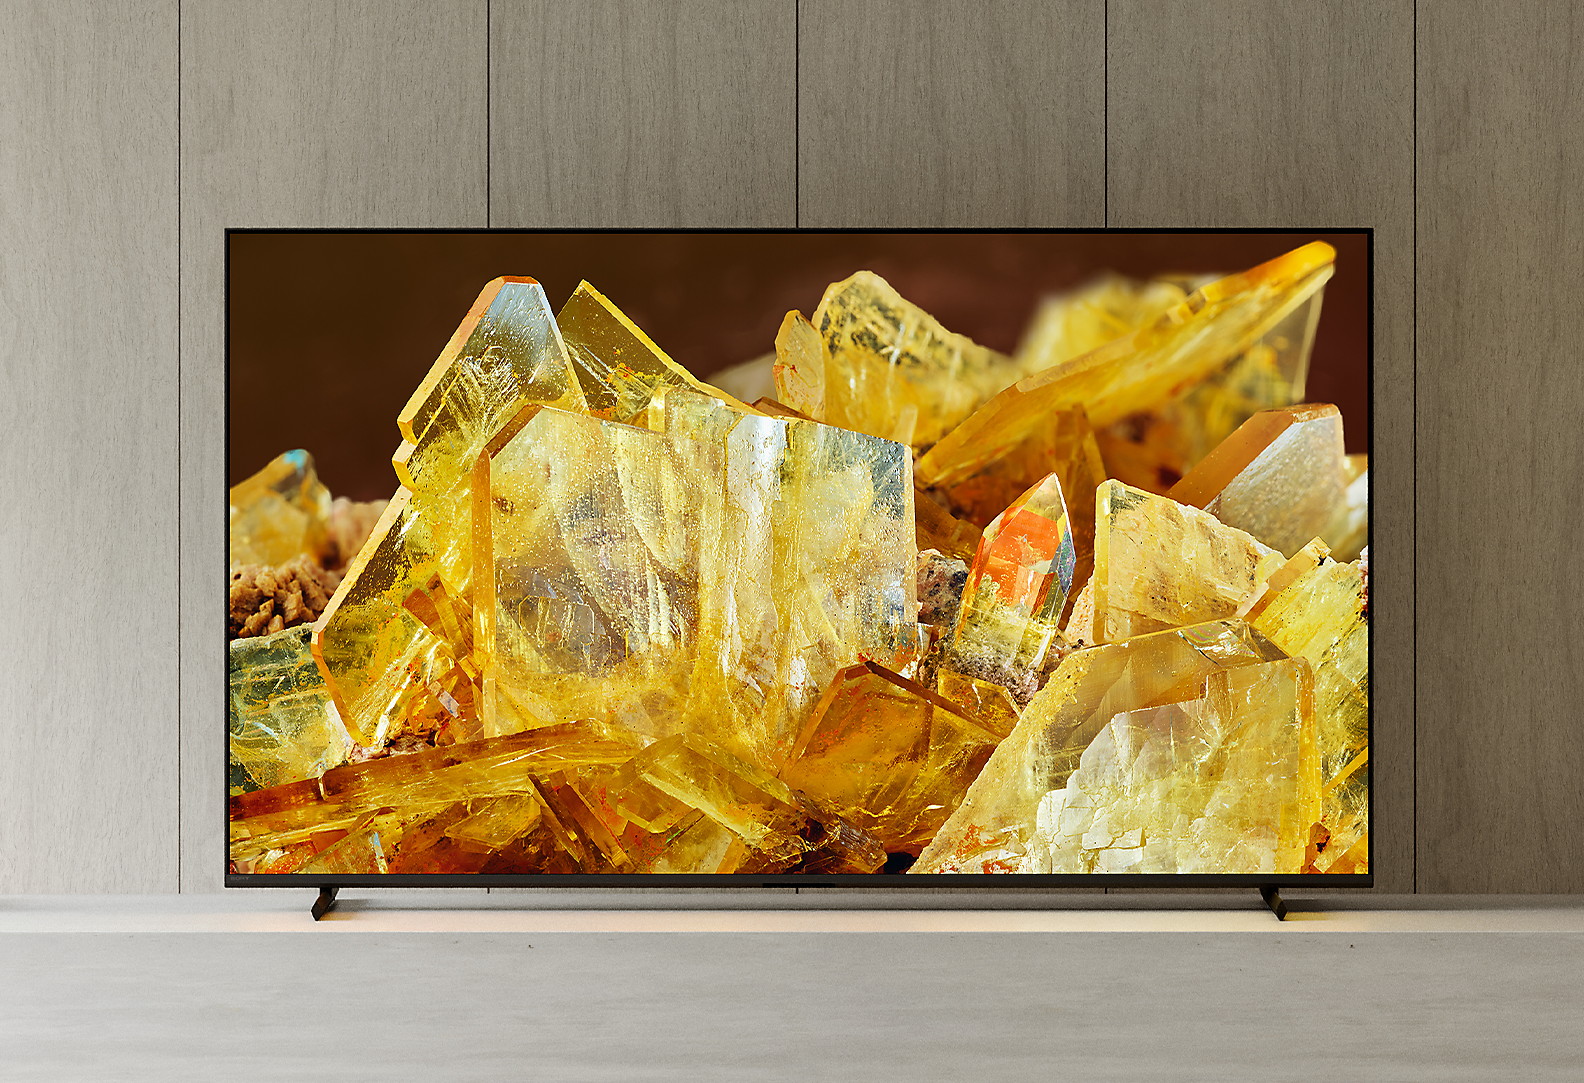 BRAVIA XR TV in a living room, displaying a close-up image of amber-coloured crystals